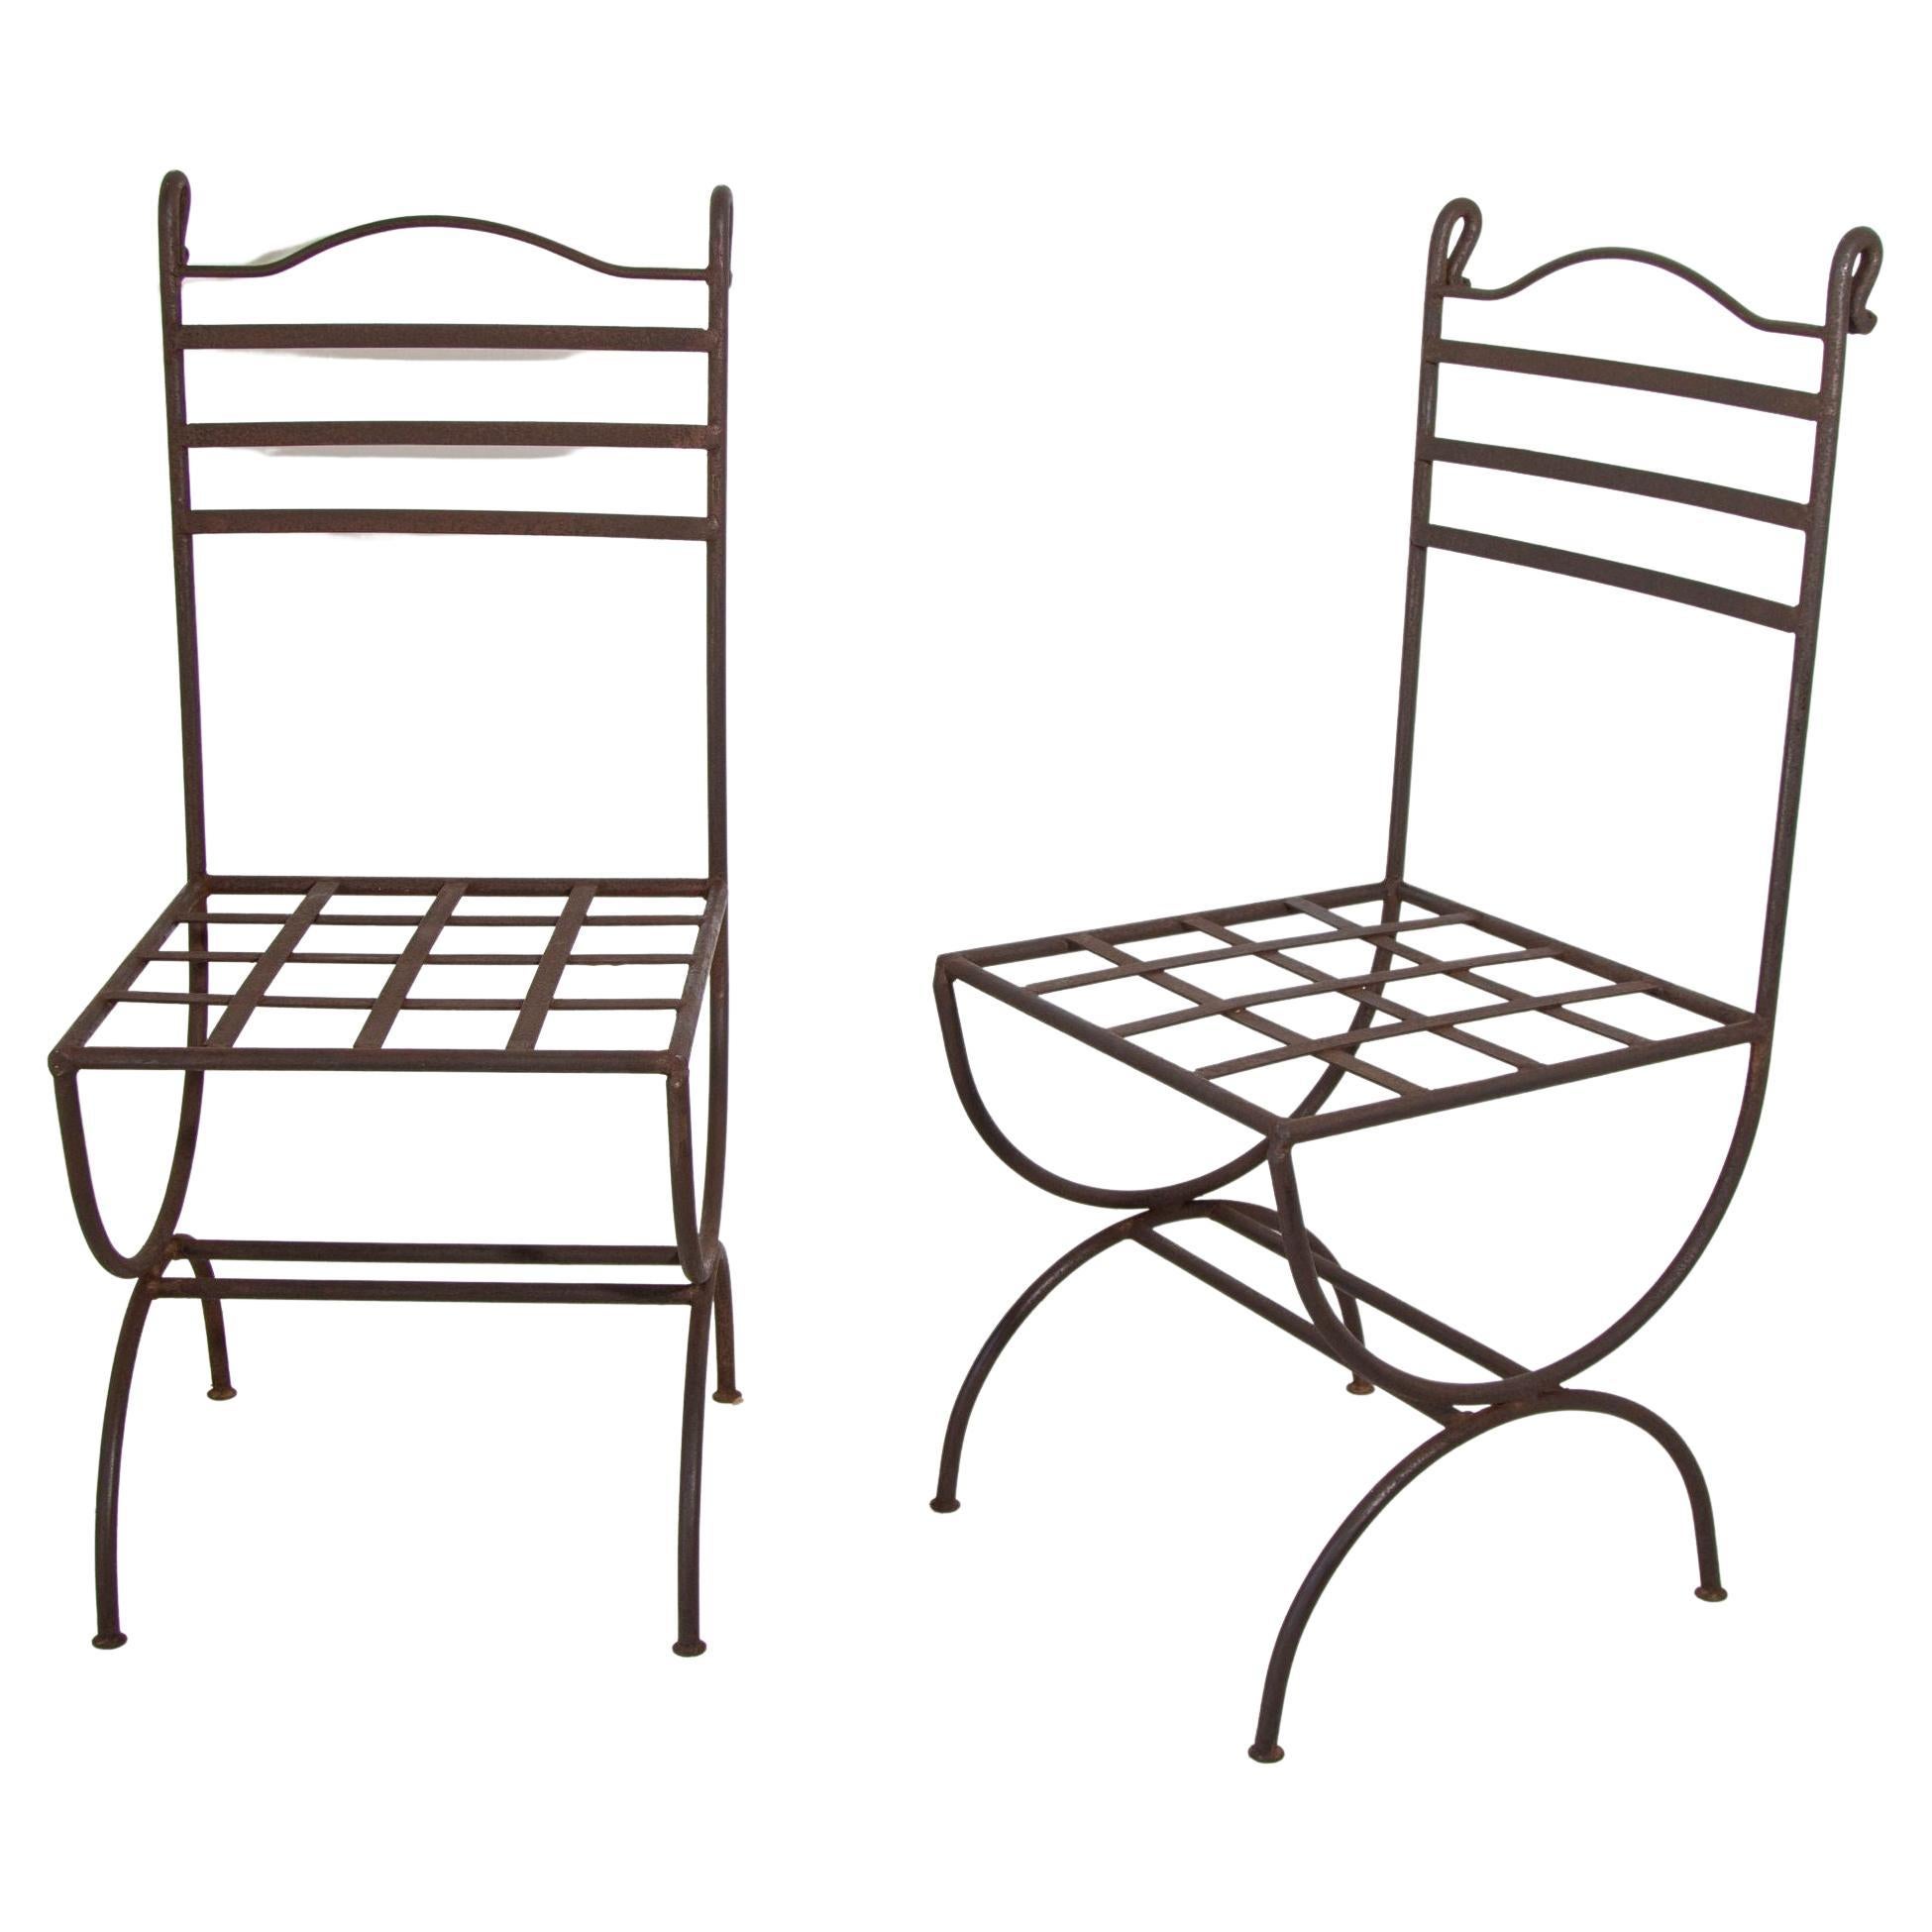 Outdoor Hand Forged Wrought-Iron Chairs French Provincial Style For Sale